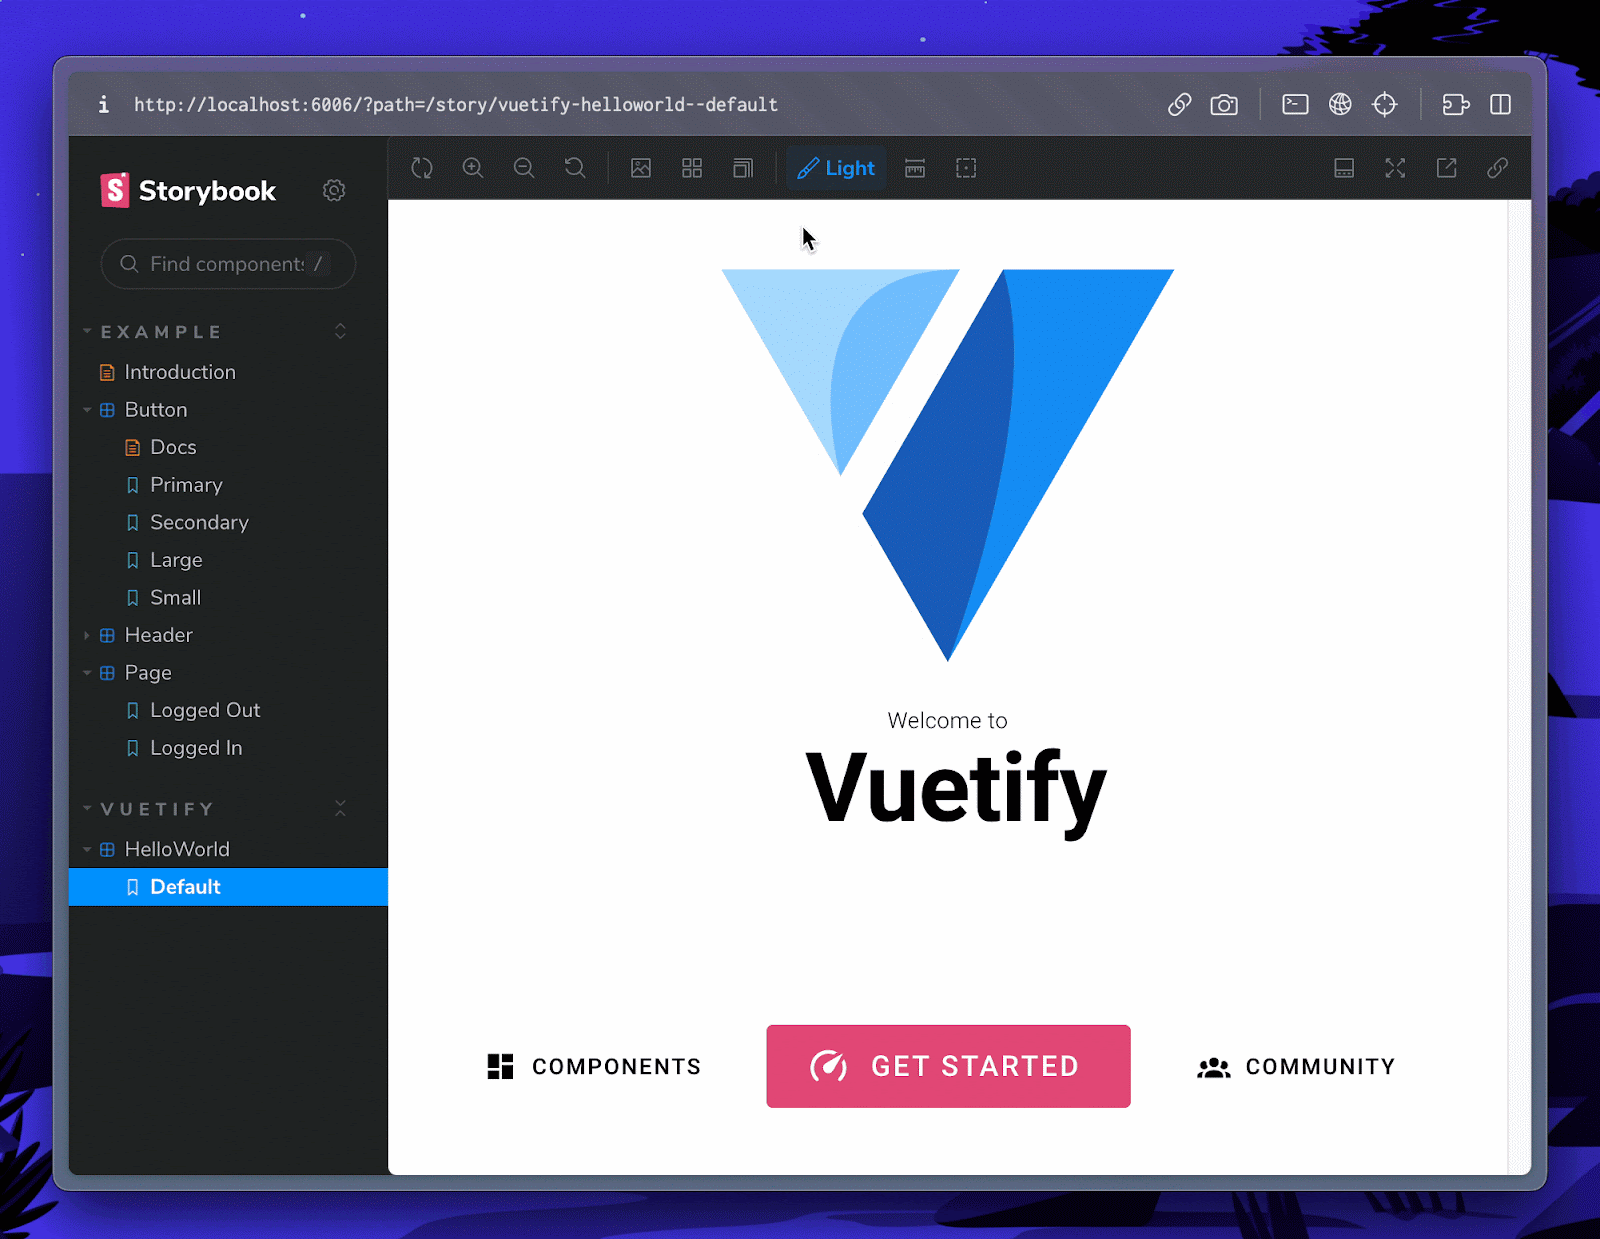 Switching from light theme to dark theme for Vuetify components in Storybook